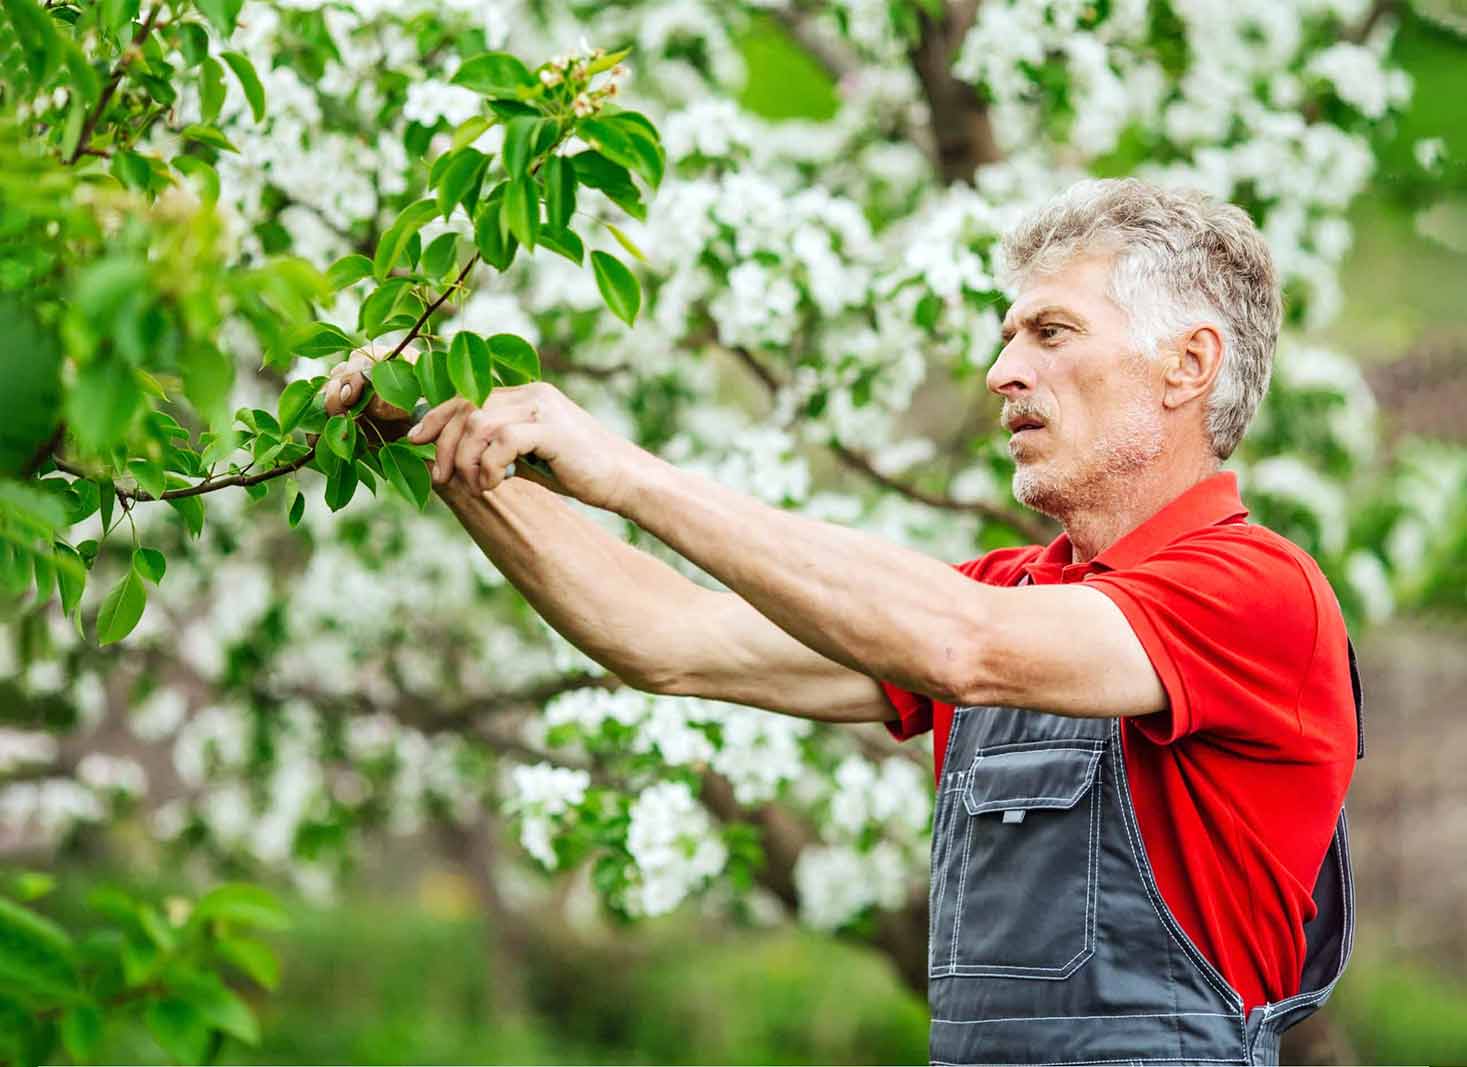 When To Prune Fruit Trees for Maximum Harvest in 2023